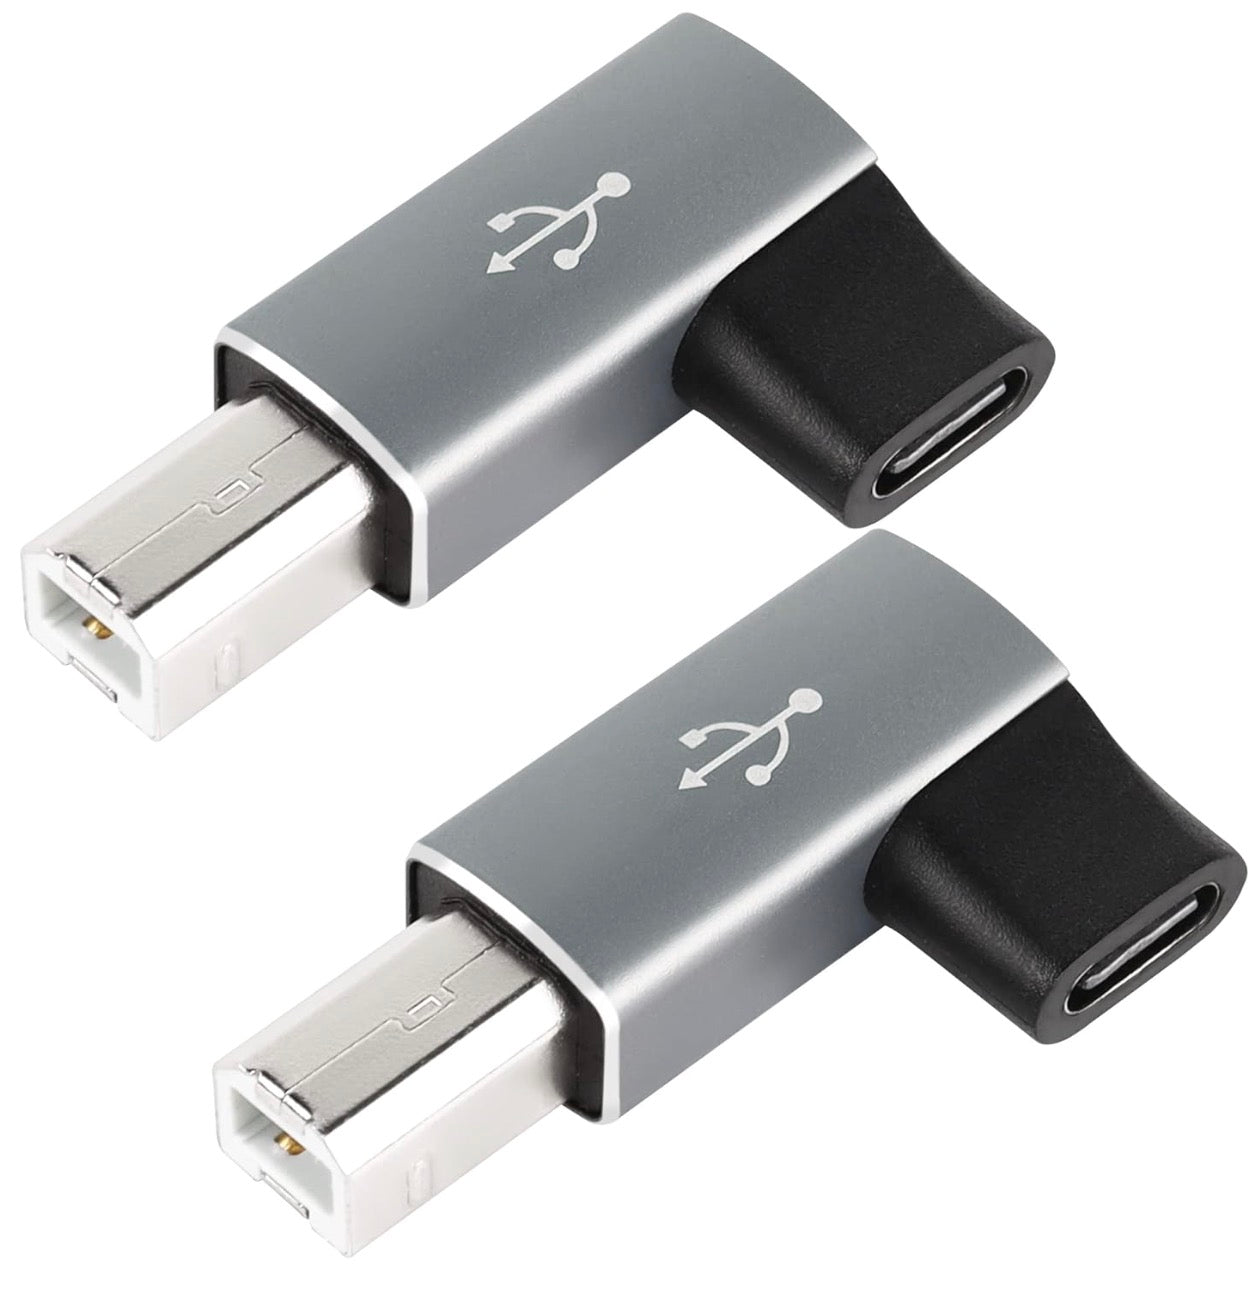 Cable iMEXX OTG USB Tipo C- USB Tipo A